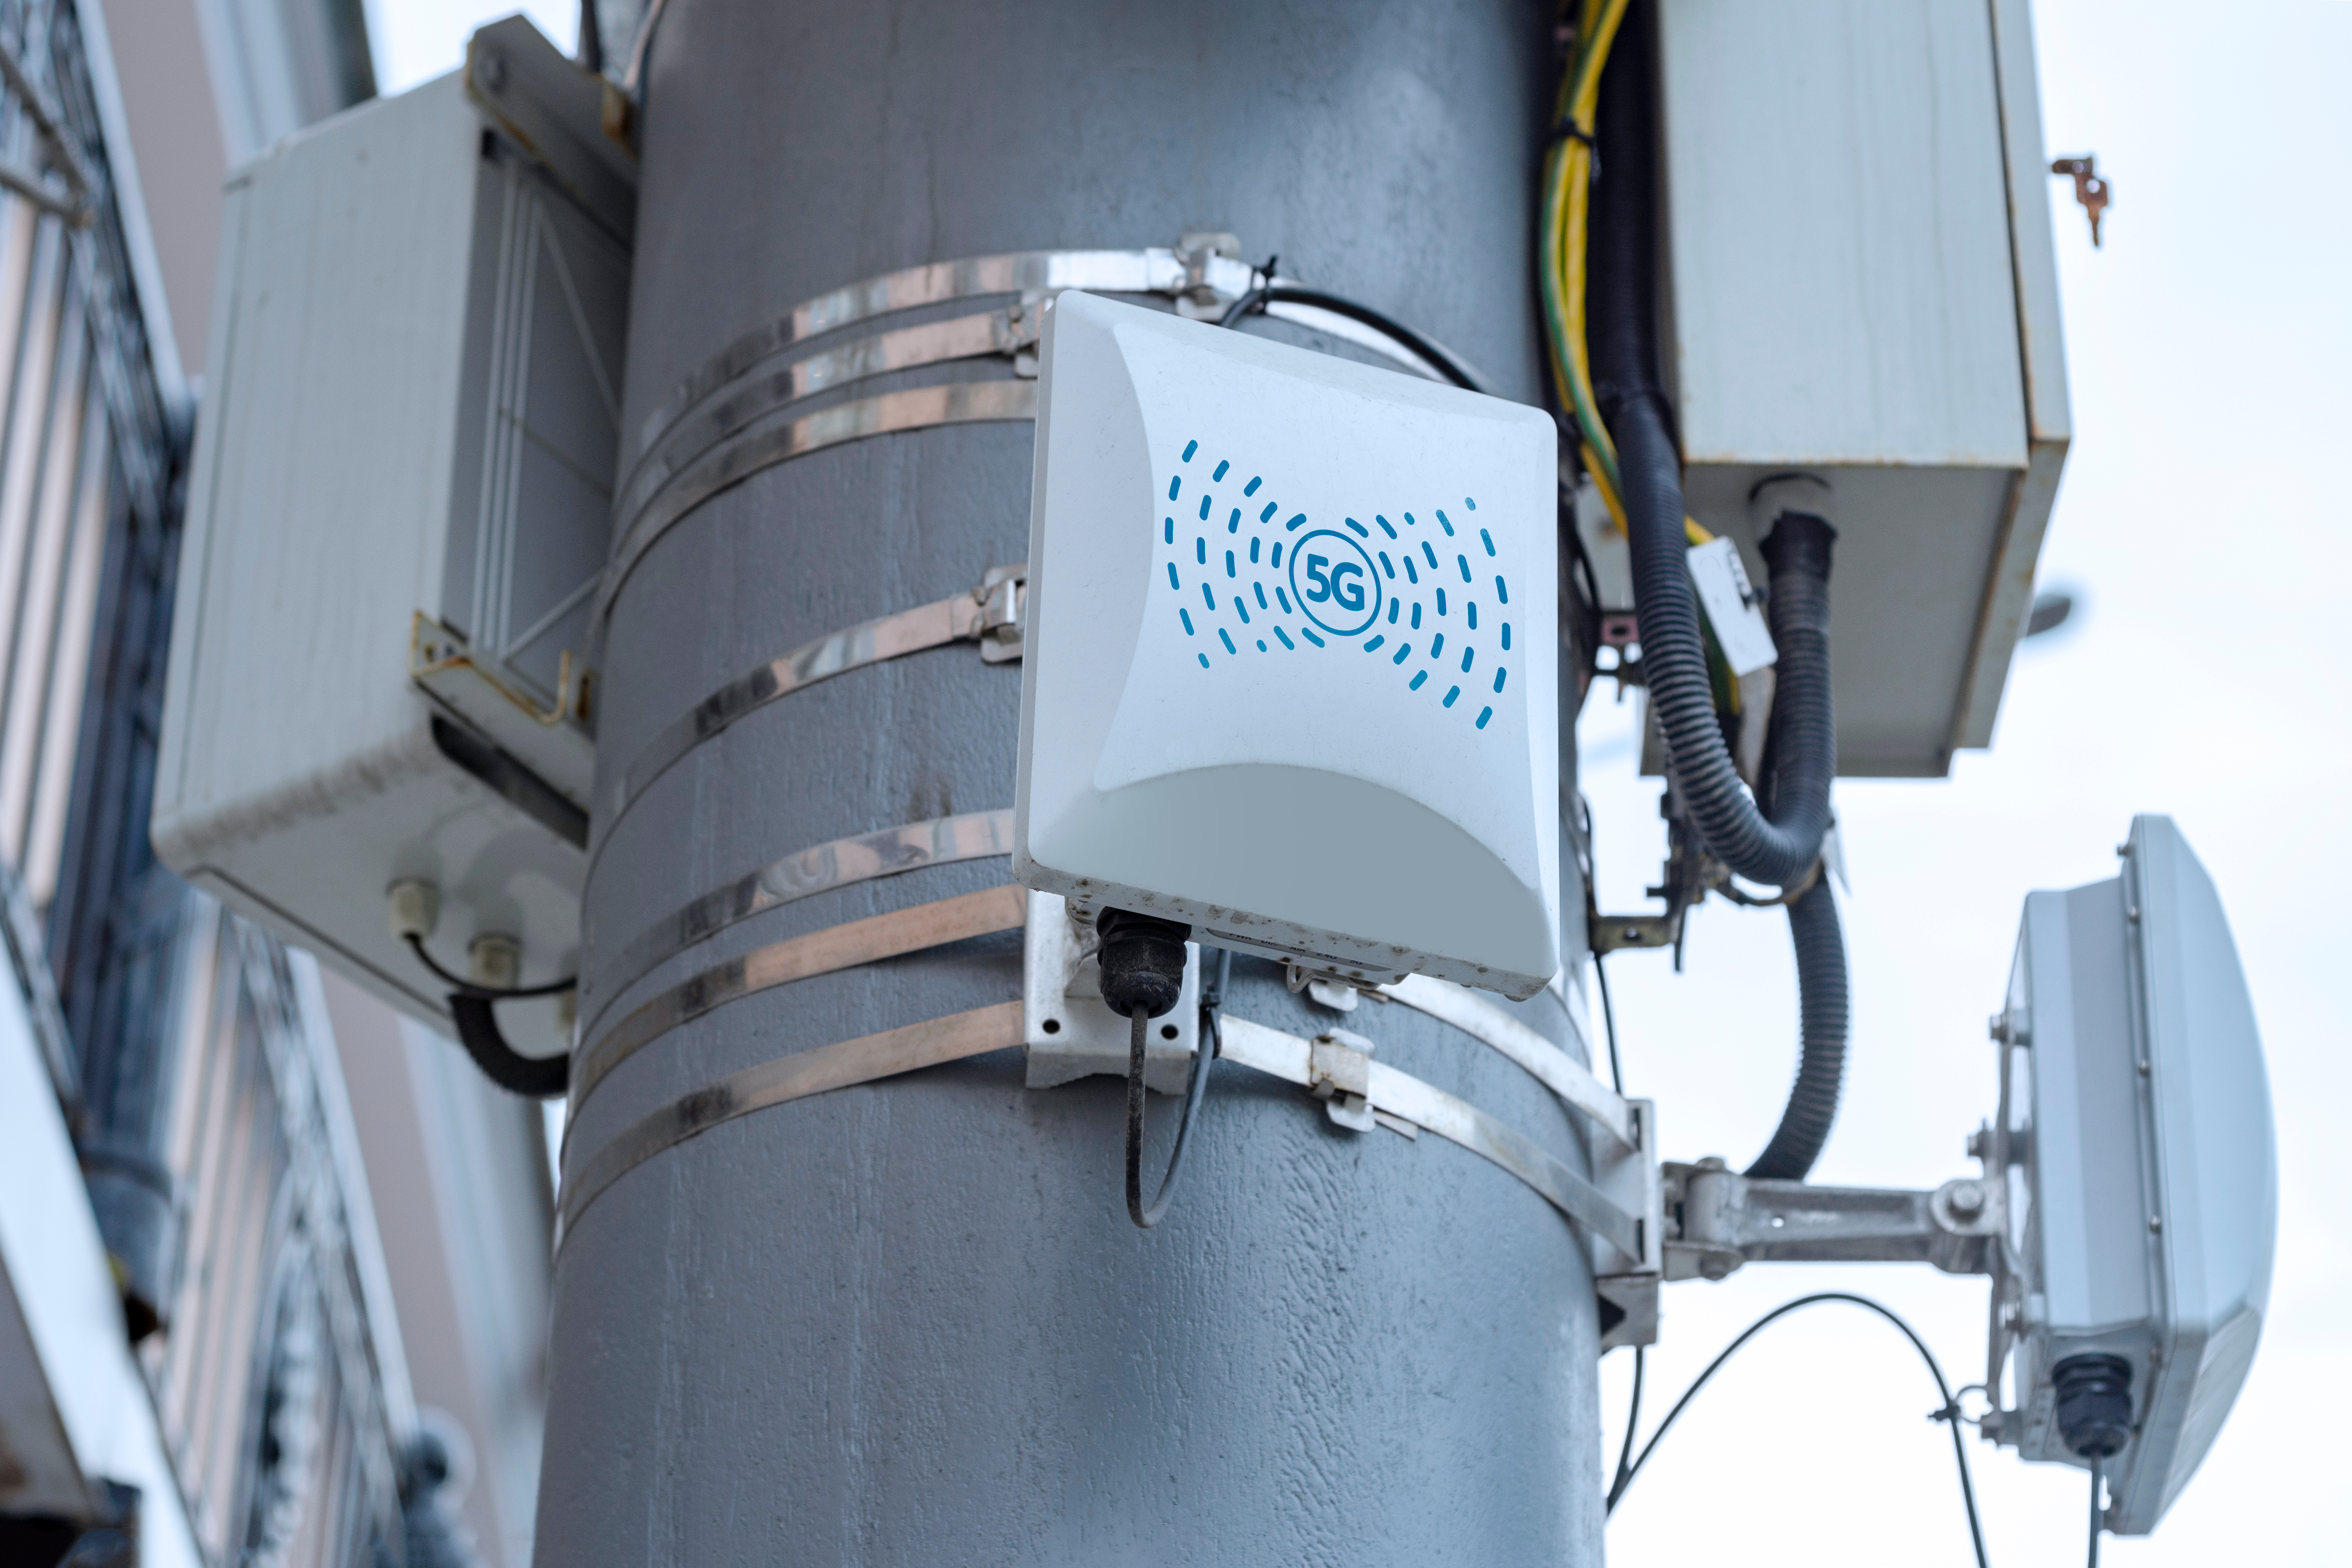 Photo of a 5G array antenna mounted on a base station.